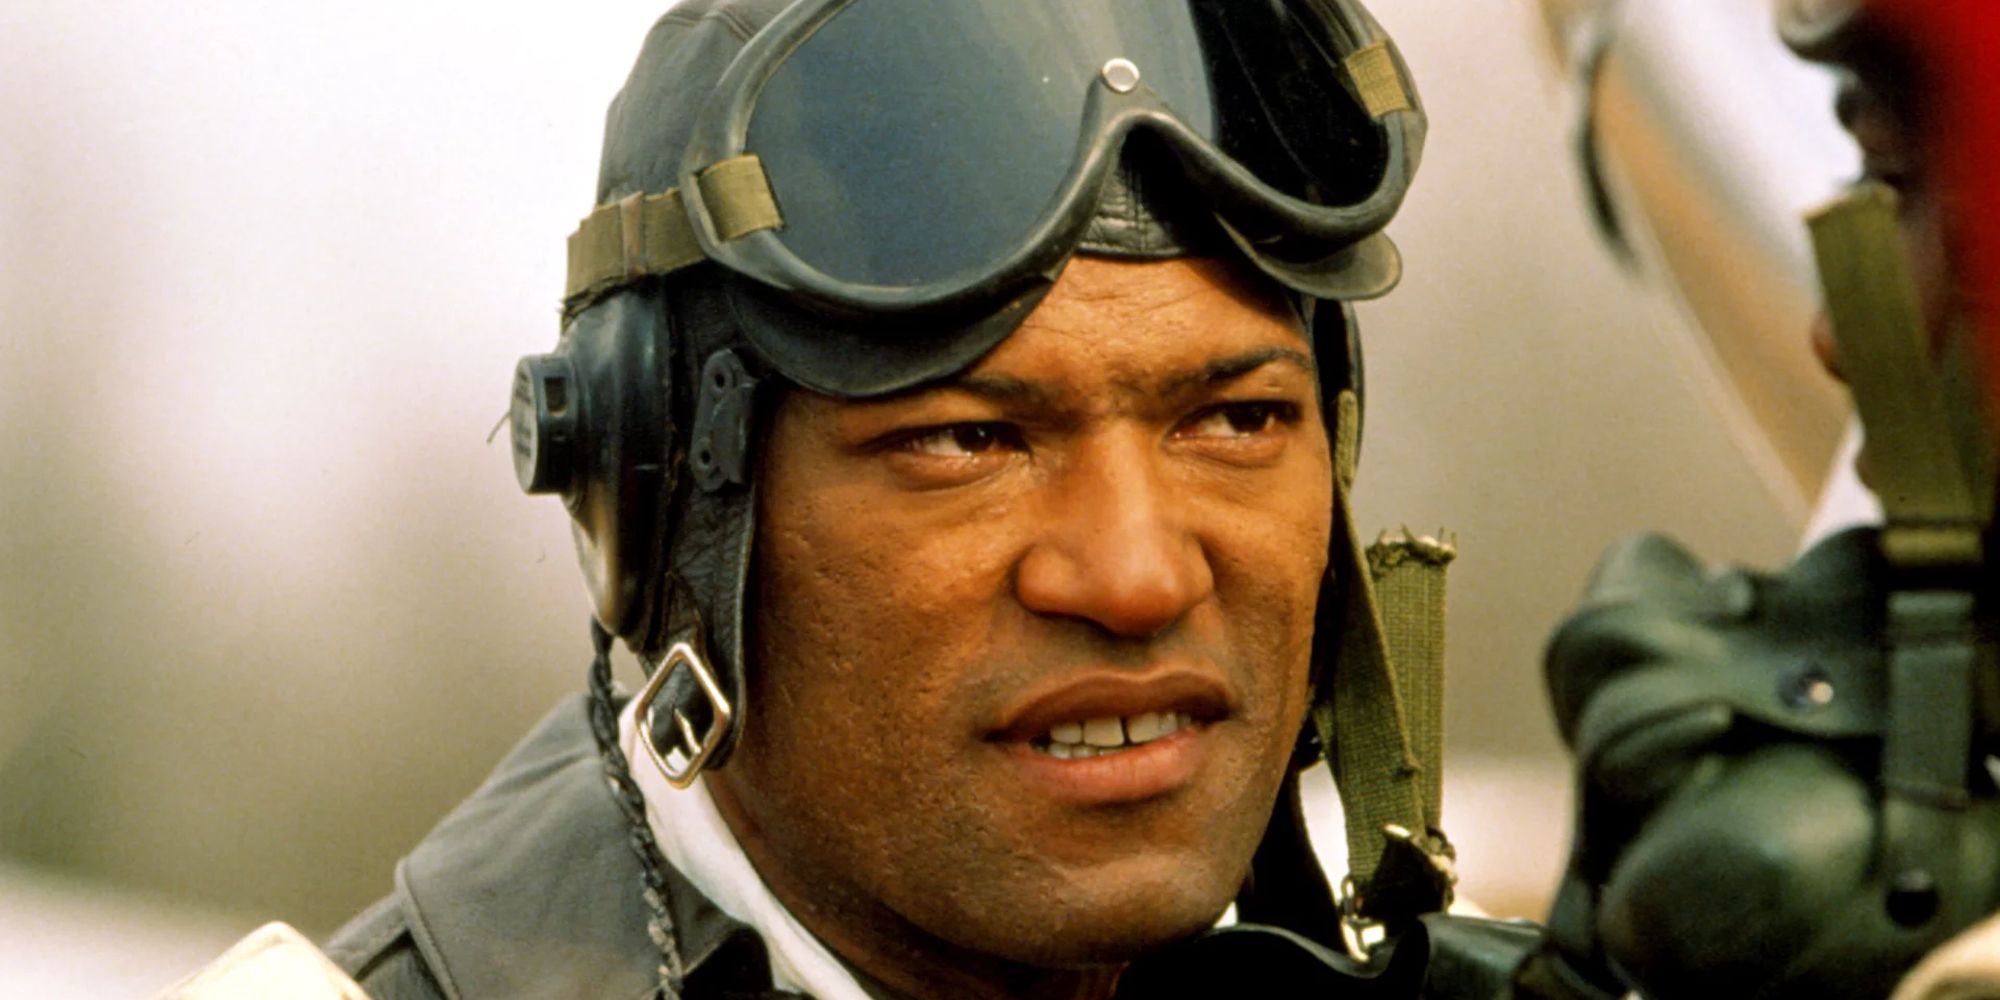 Laurence Fishburne in The Tuskegee Airmen